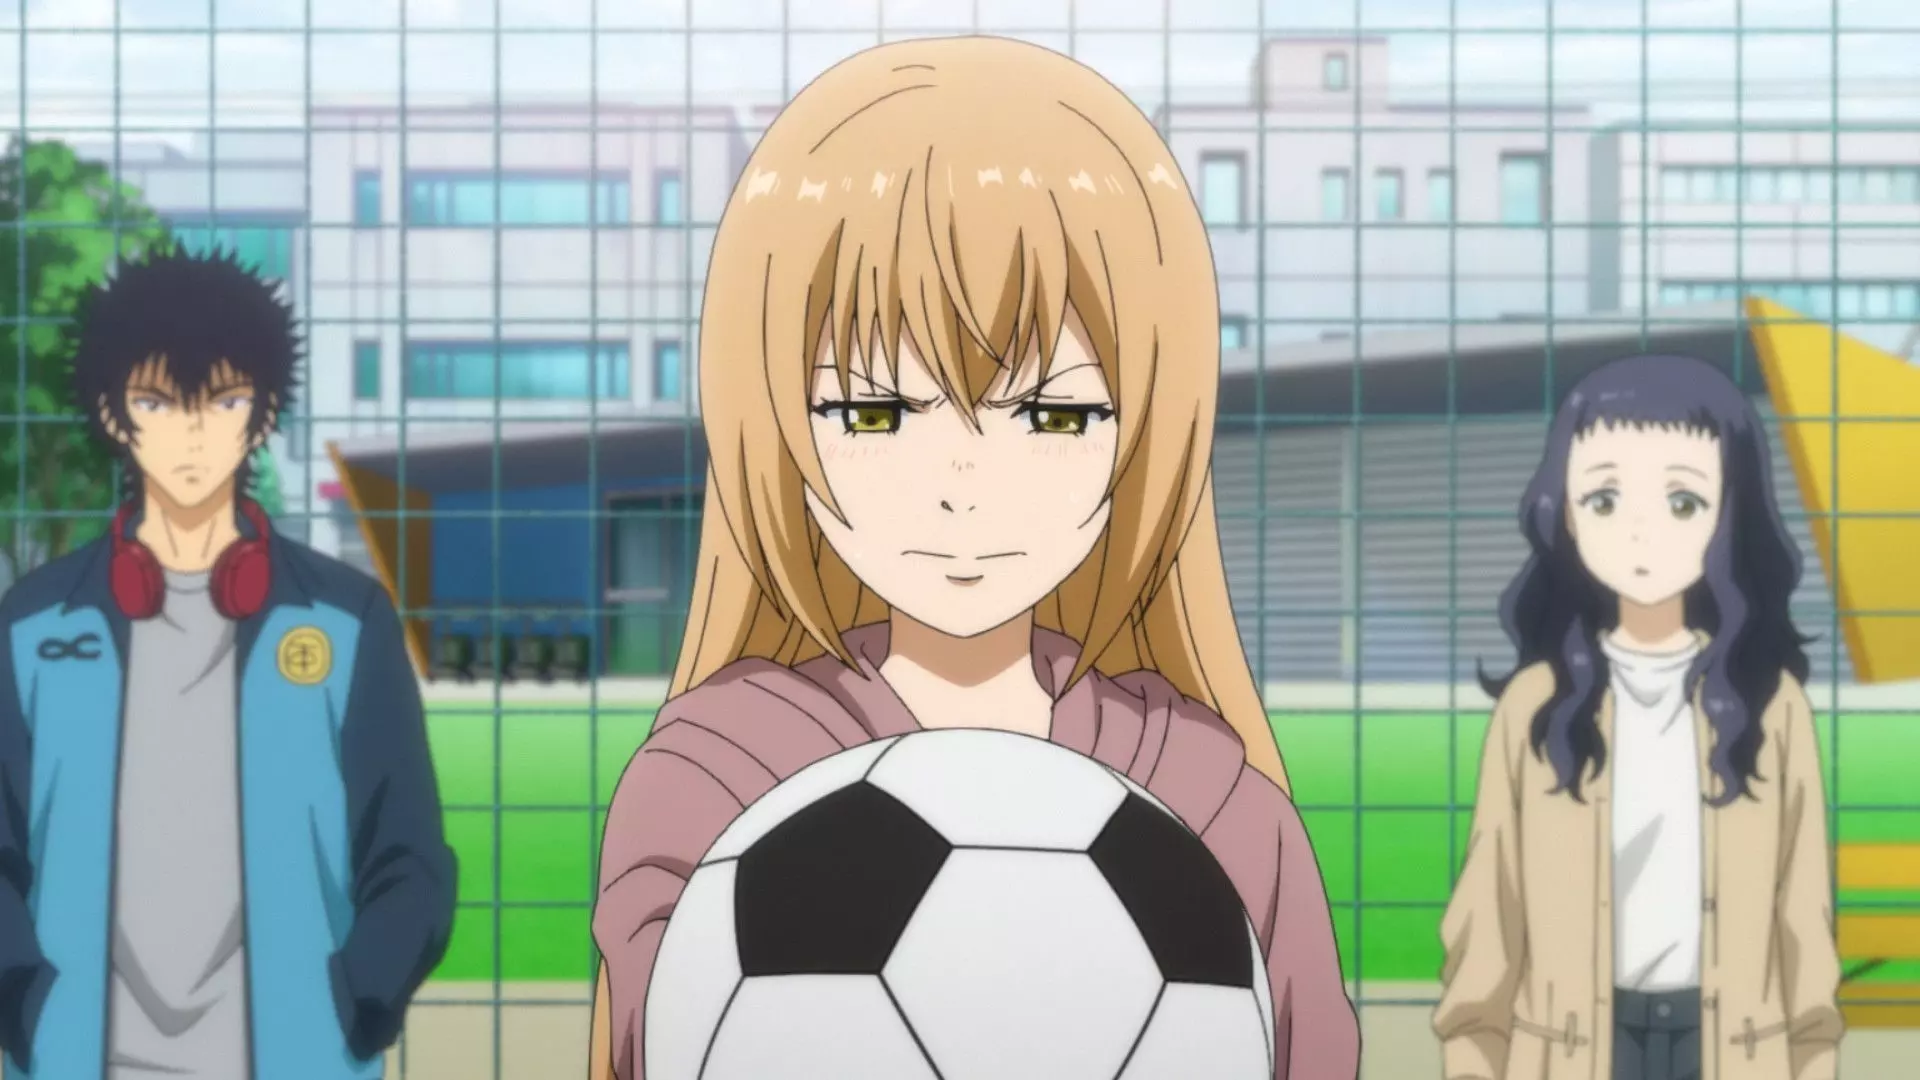 Hana delivering the ball out in the Aoashi anime